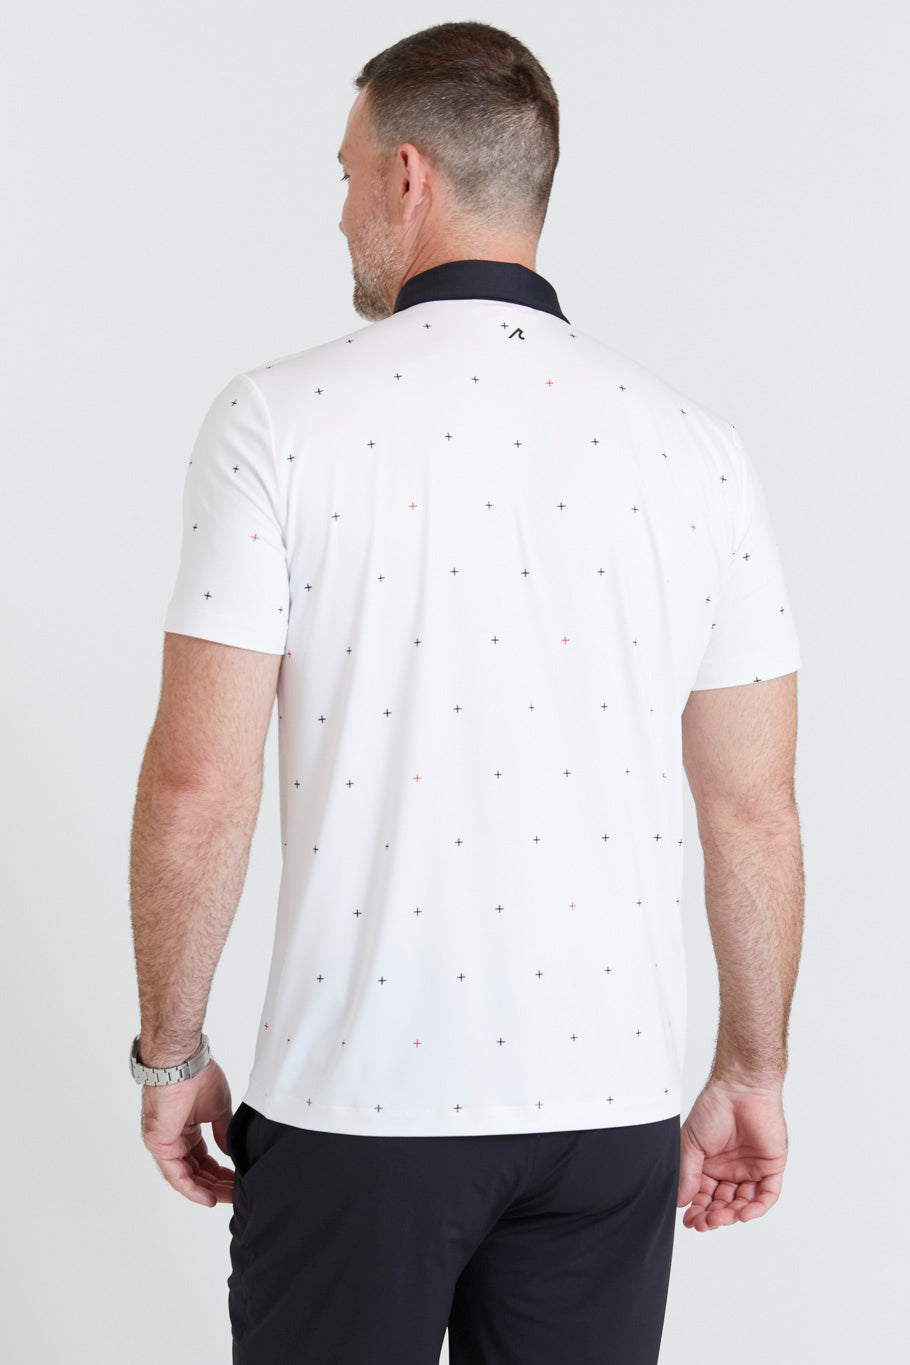 Image of the sheridon polo in bright white